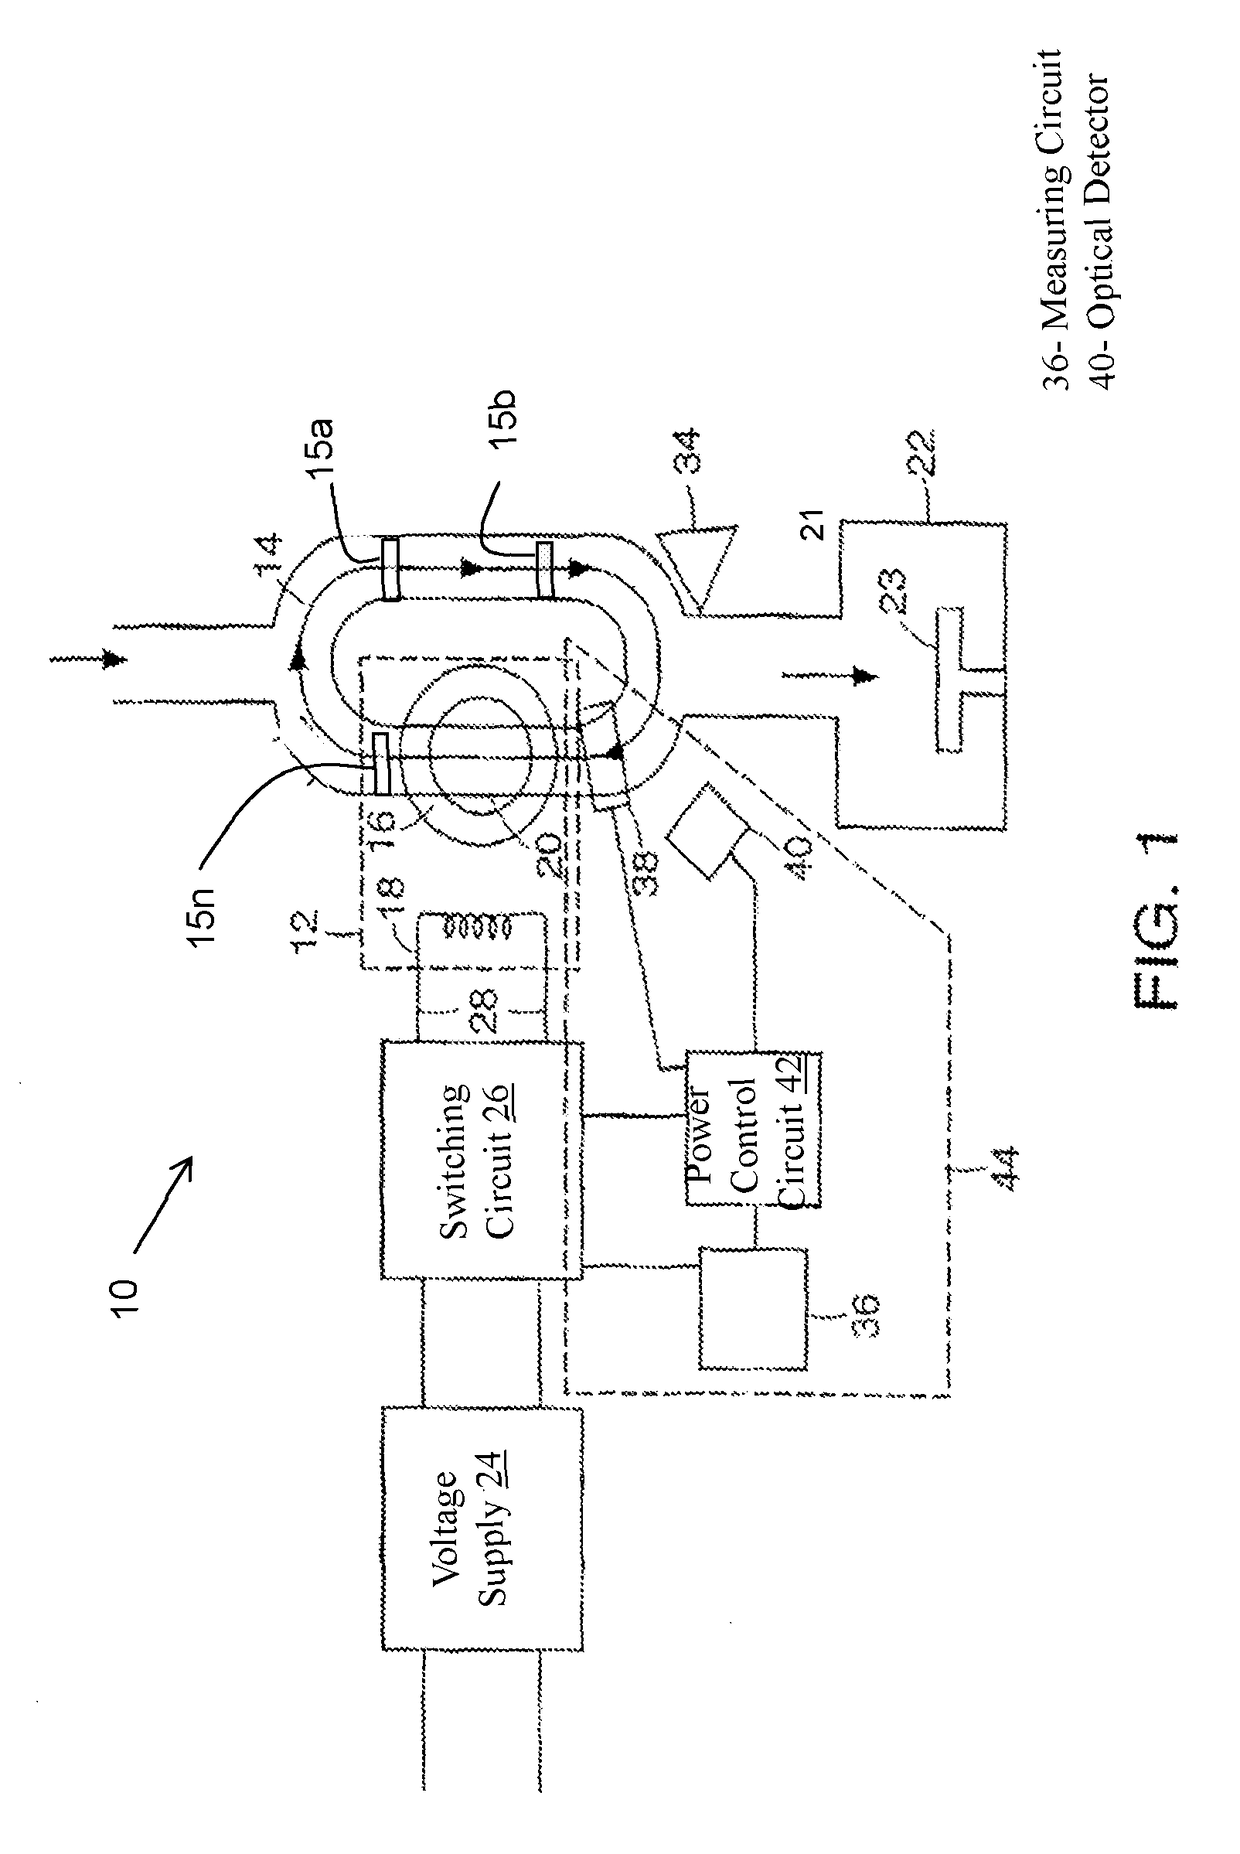 Apparatus and method for plasma ignition with a self-resonating device